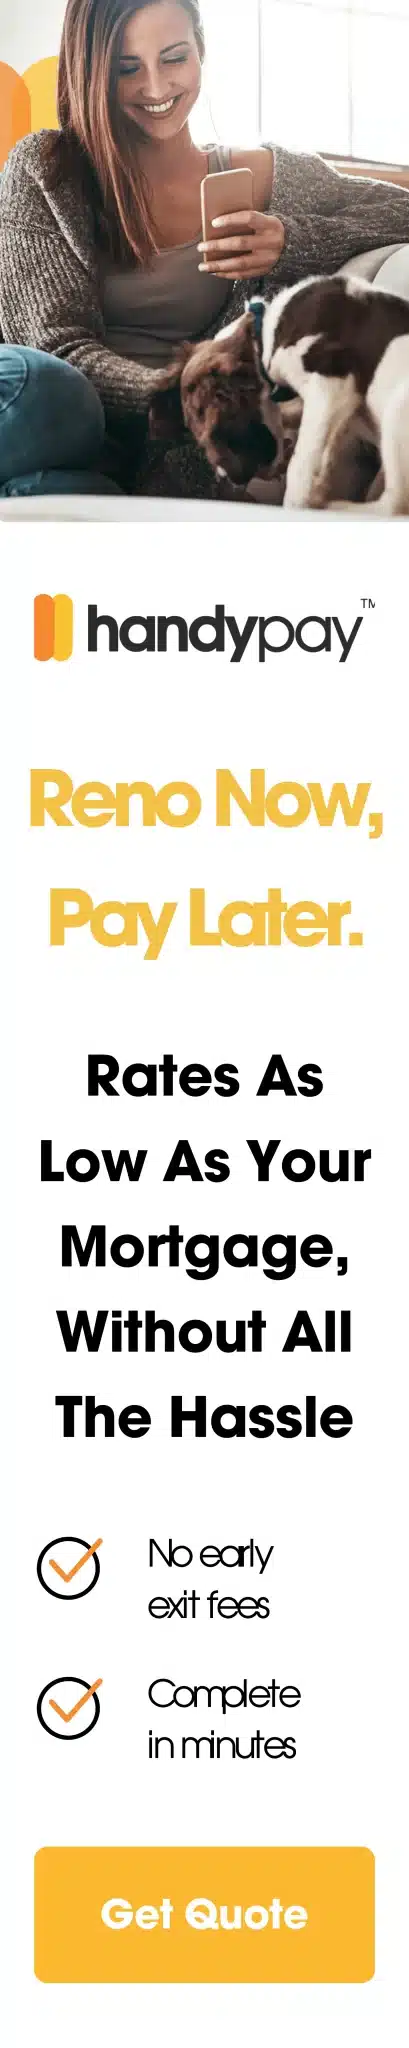 Reno Now, Pay Later Handypay